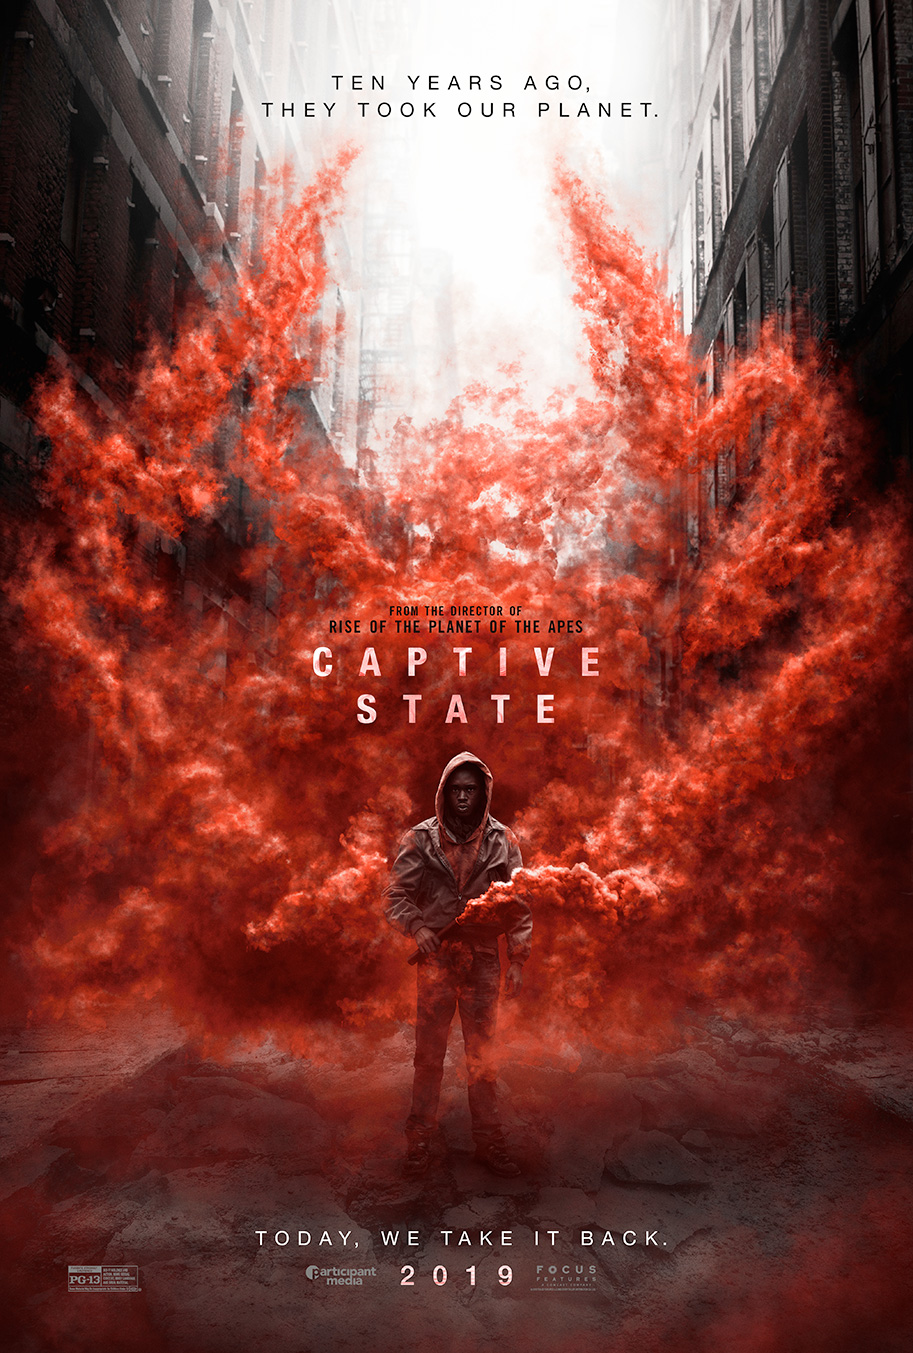 Captive State poster (Focus Features)